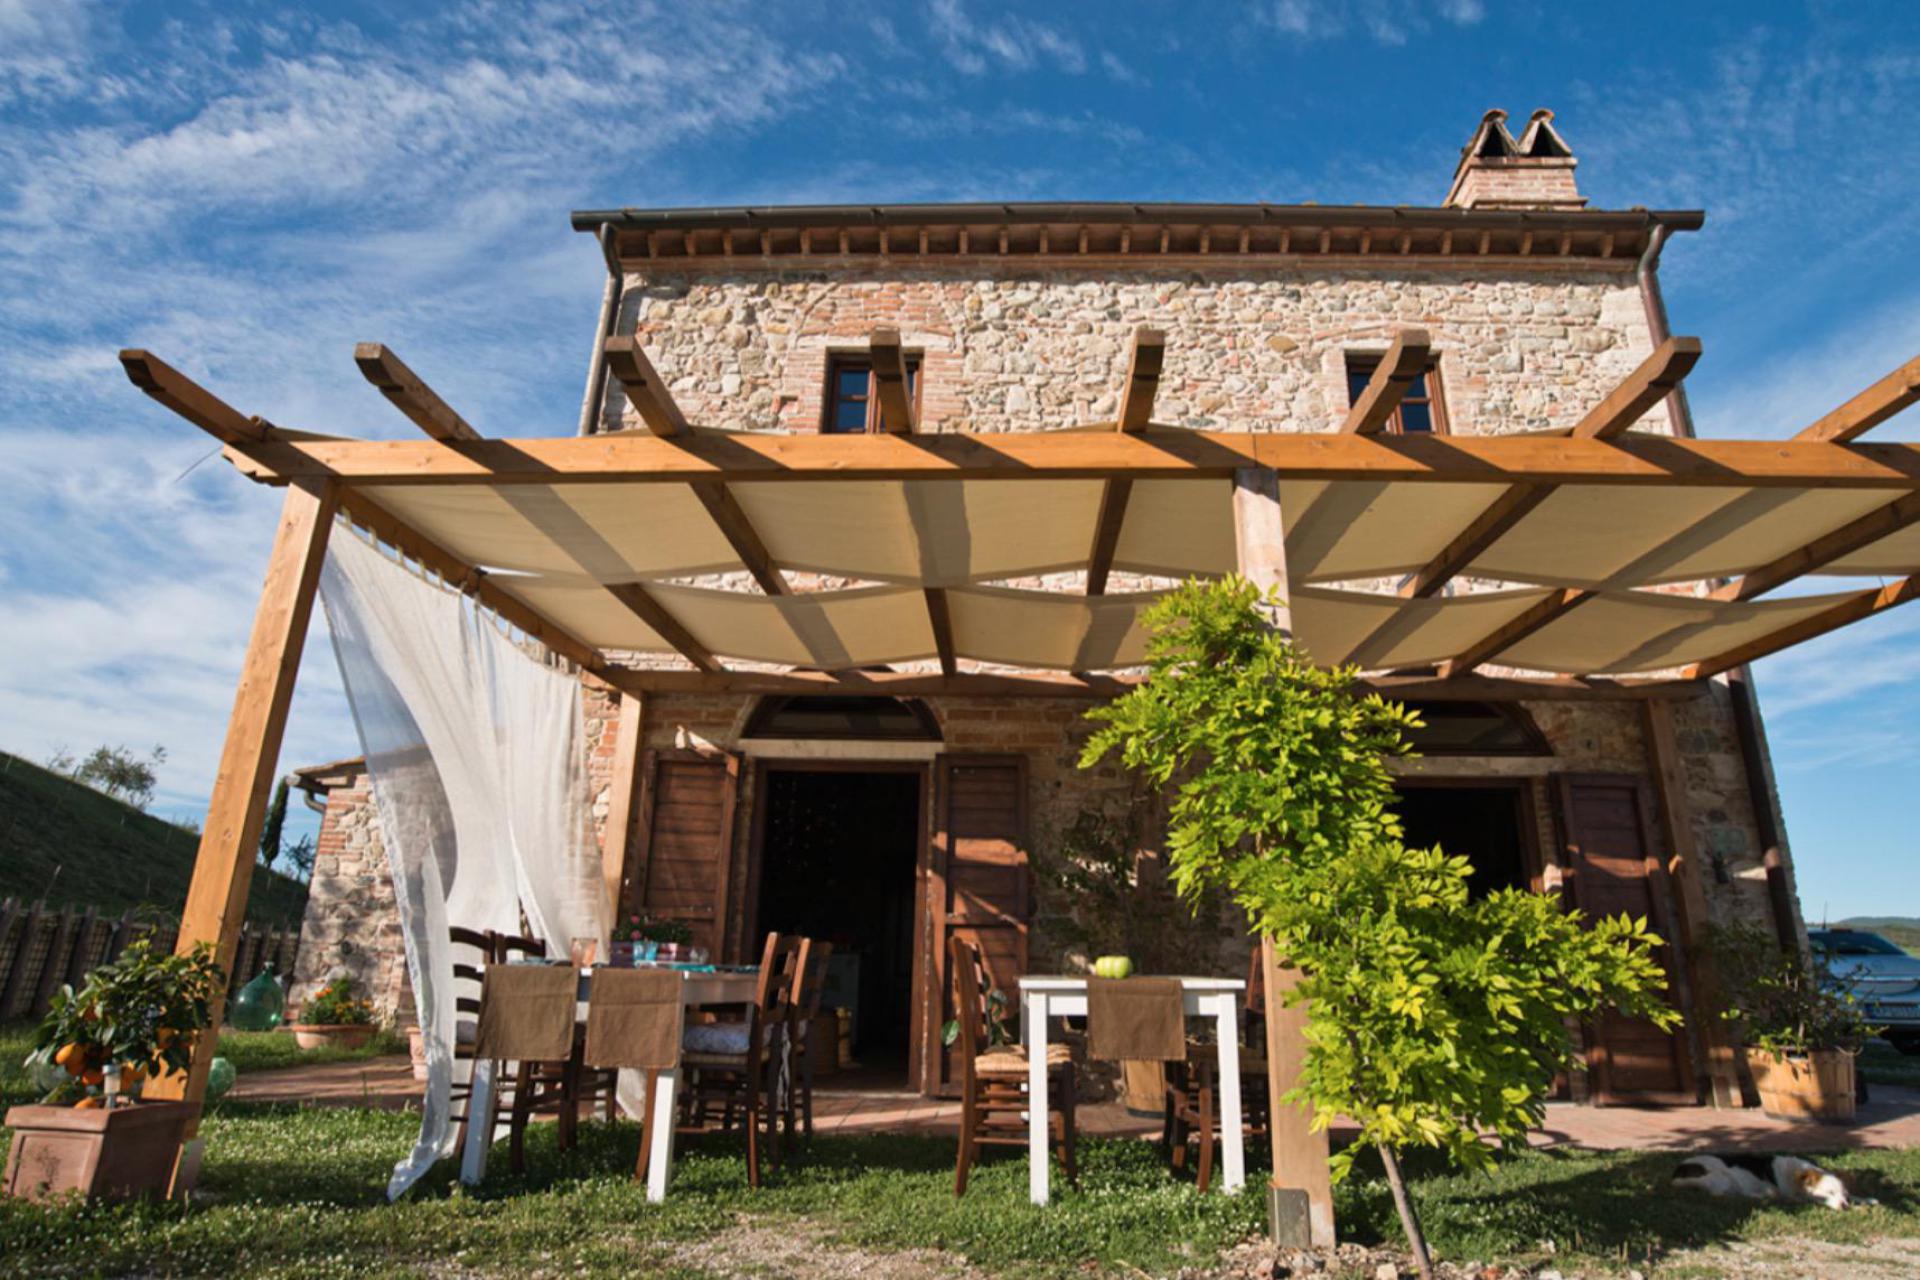 Cozy agriturismo with amazing views of Volterra, Tuscany